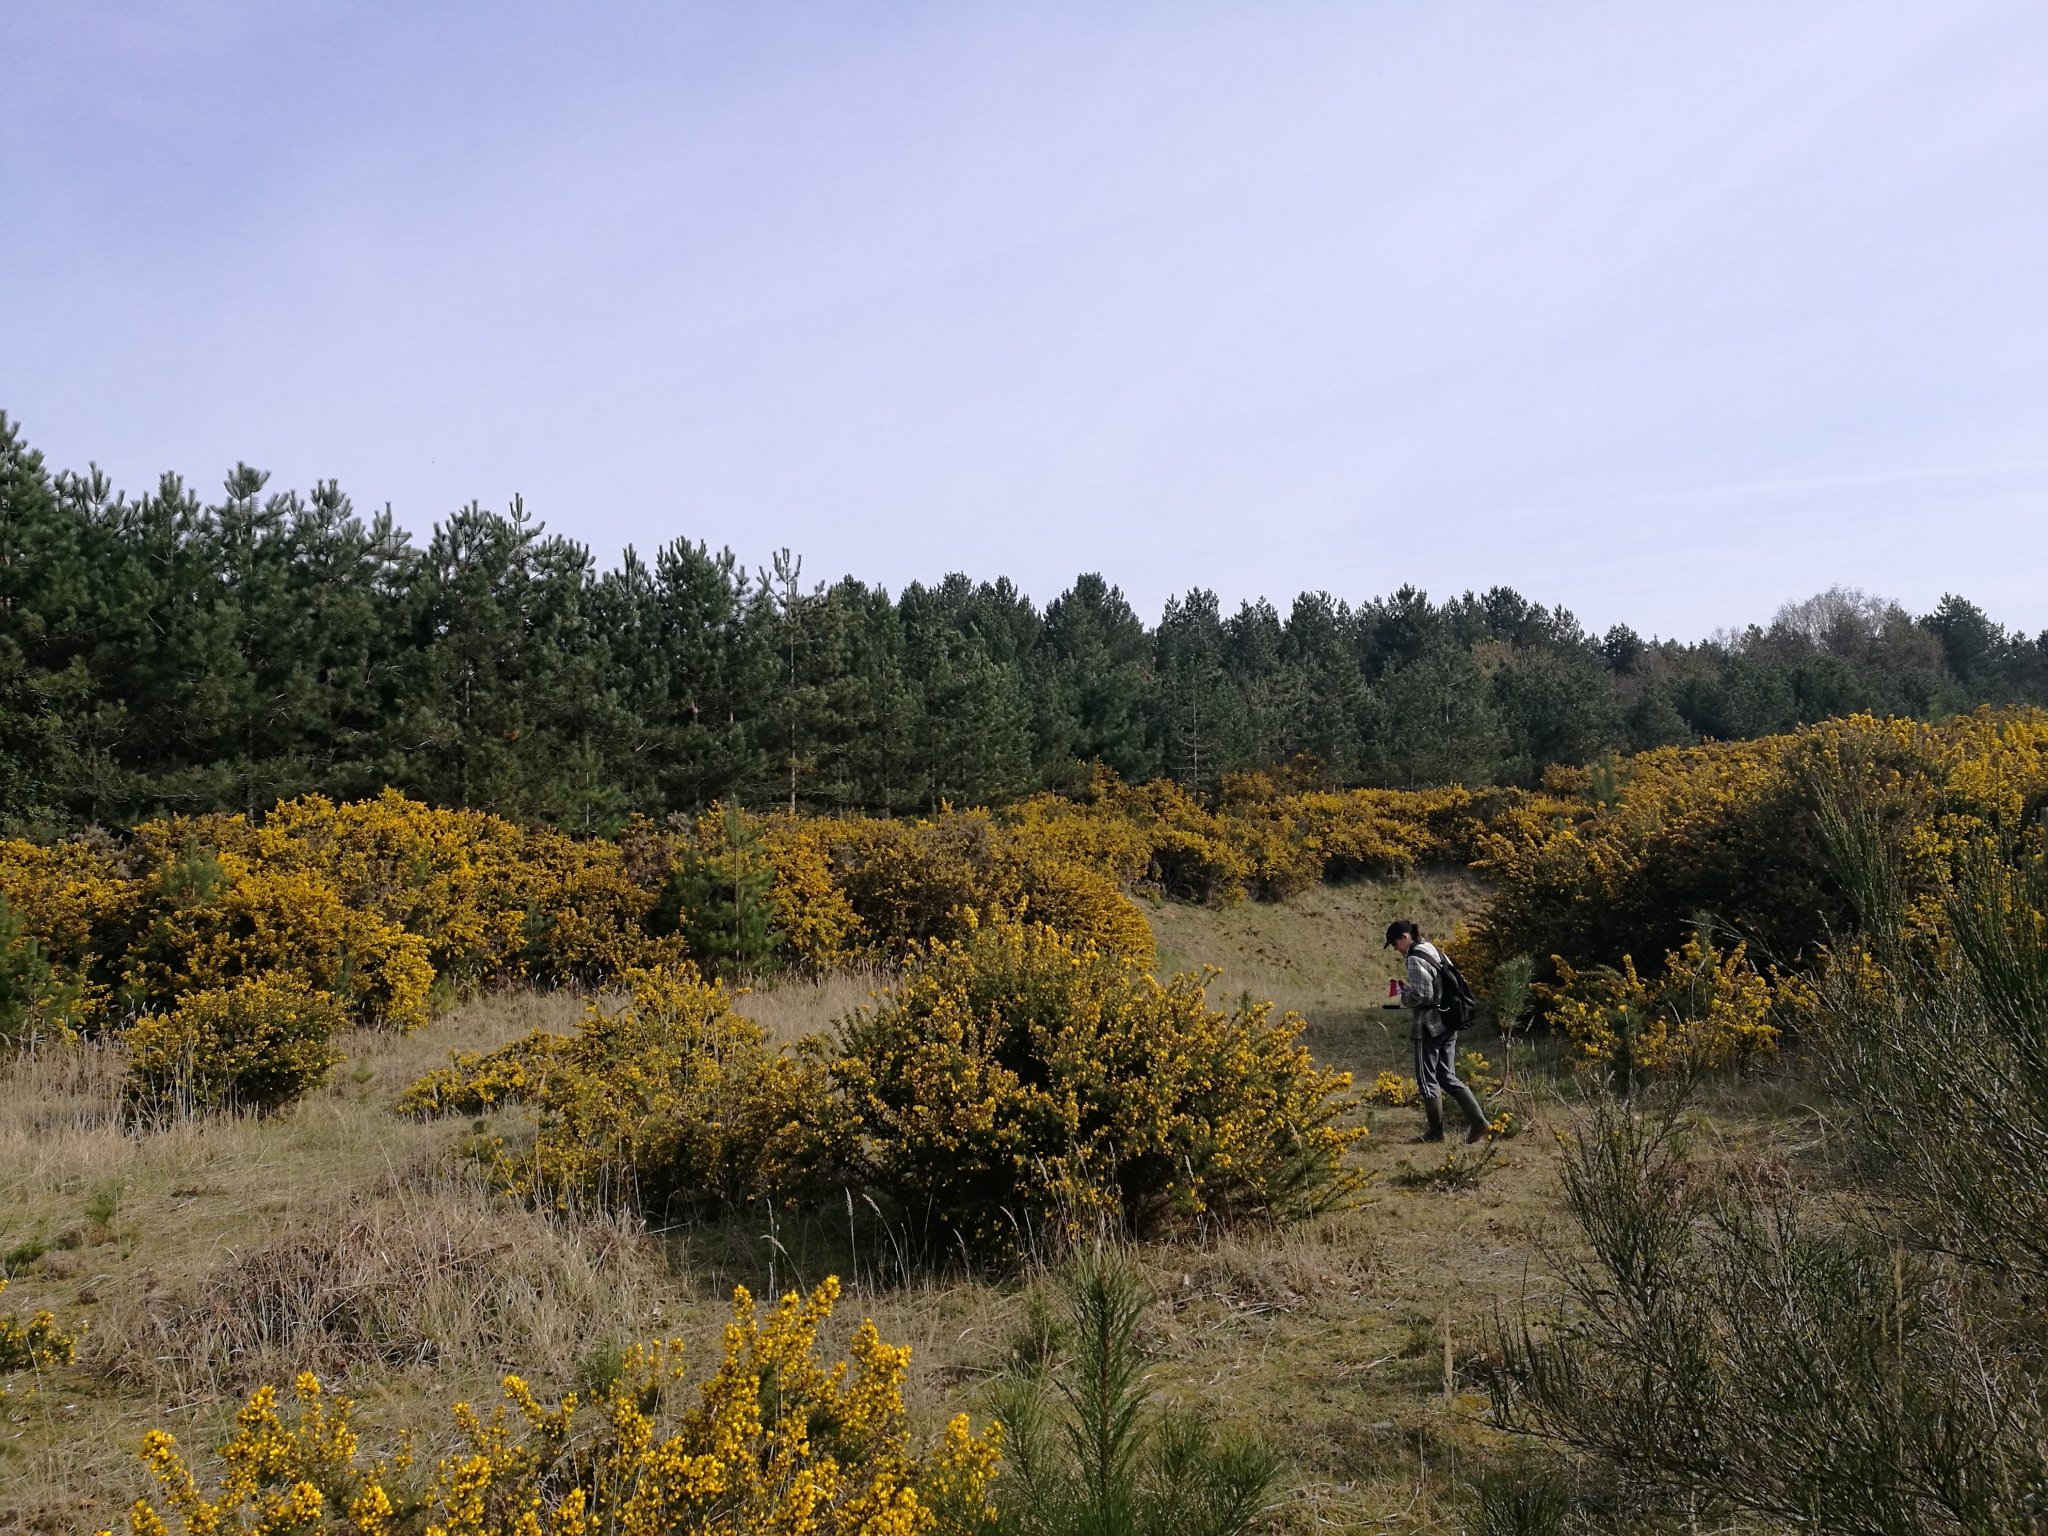 A photo from the FoTF Conservation Event - April 2022 - Scrub Clearance at Mildenhall Mugwort Pits : A volunteer works amongst the Gorse